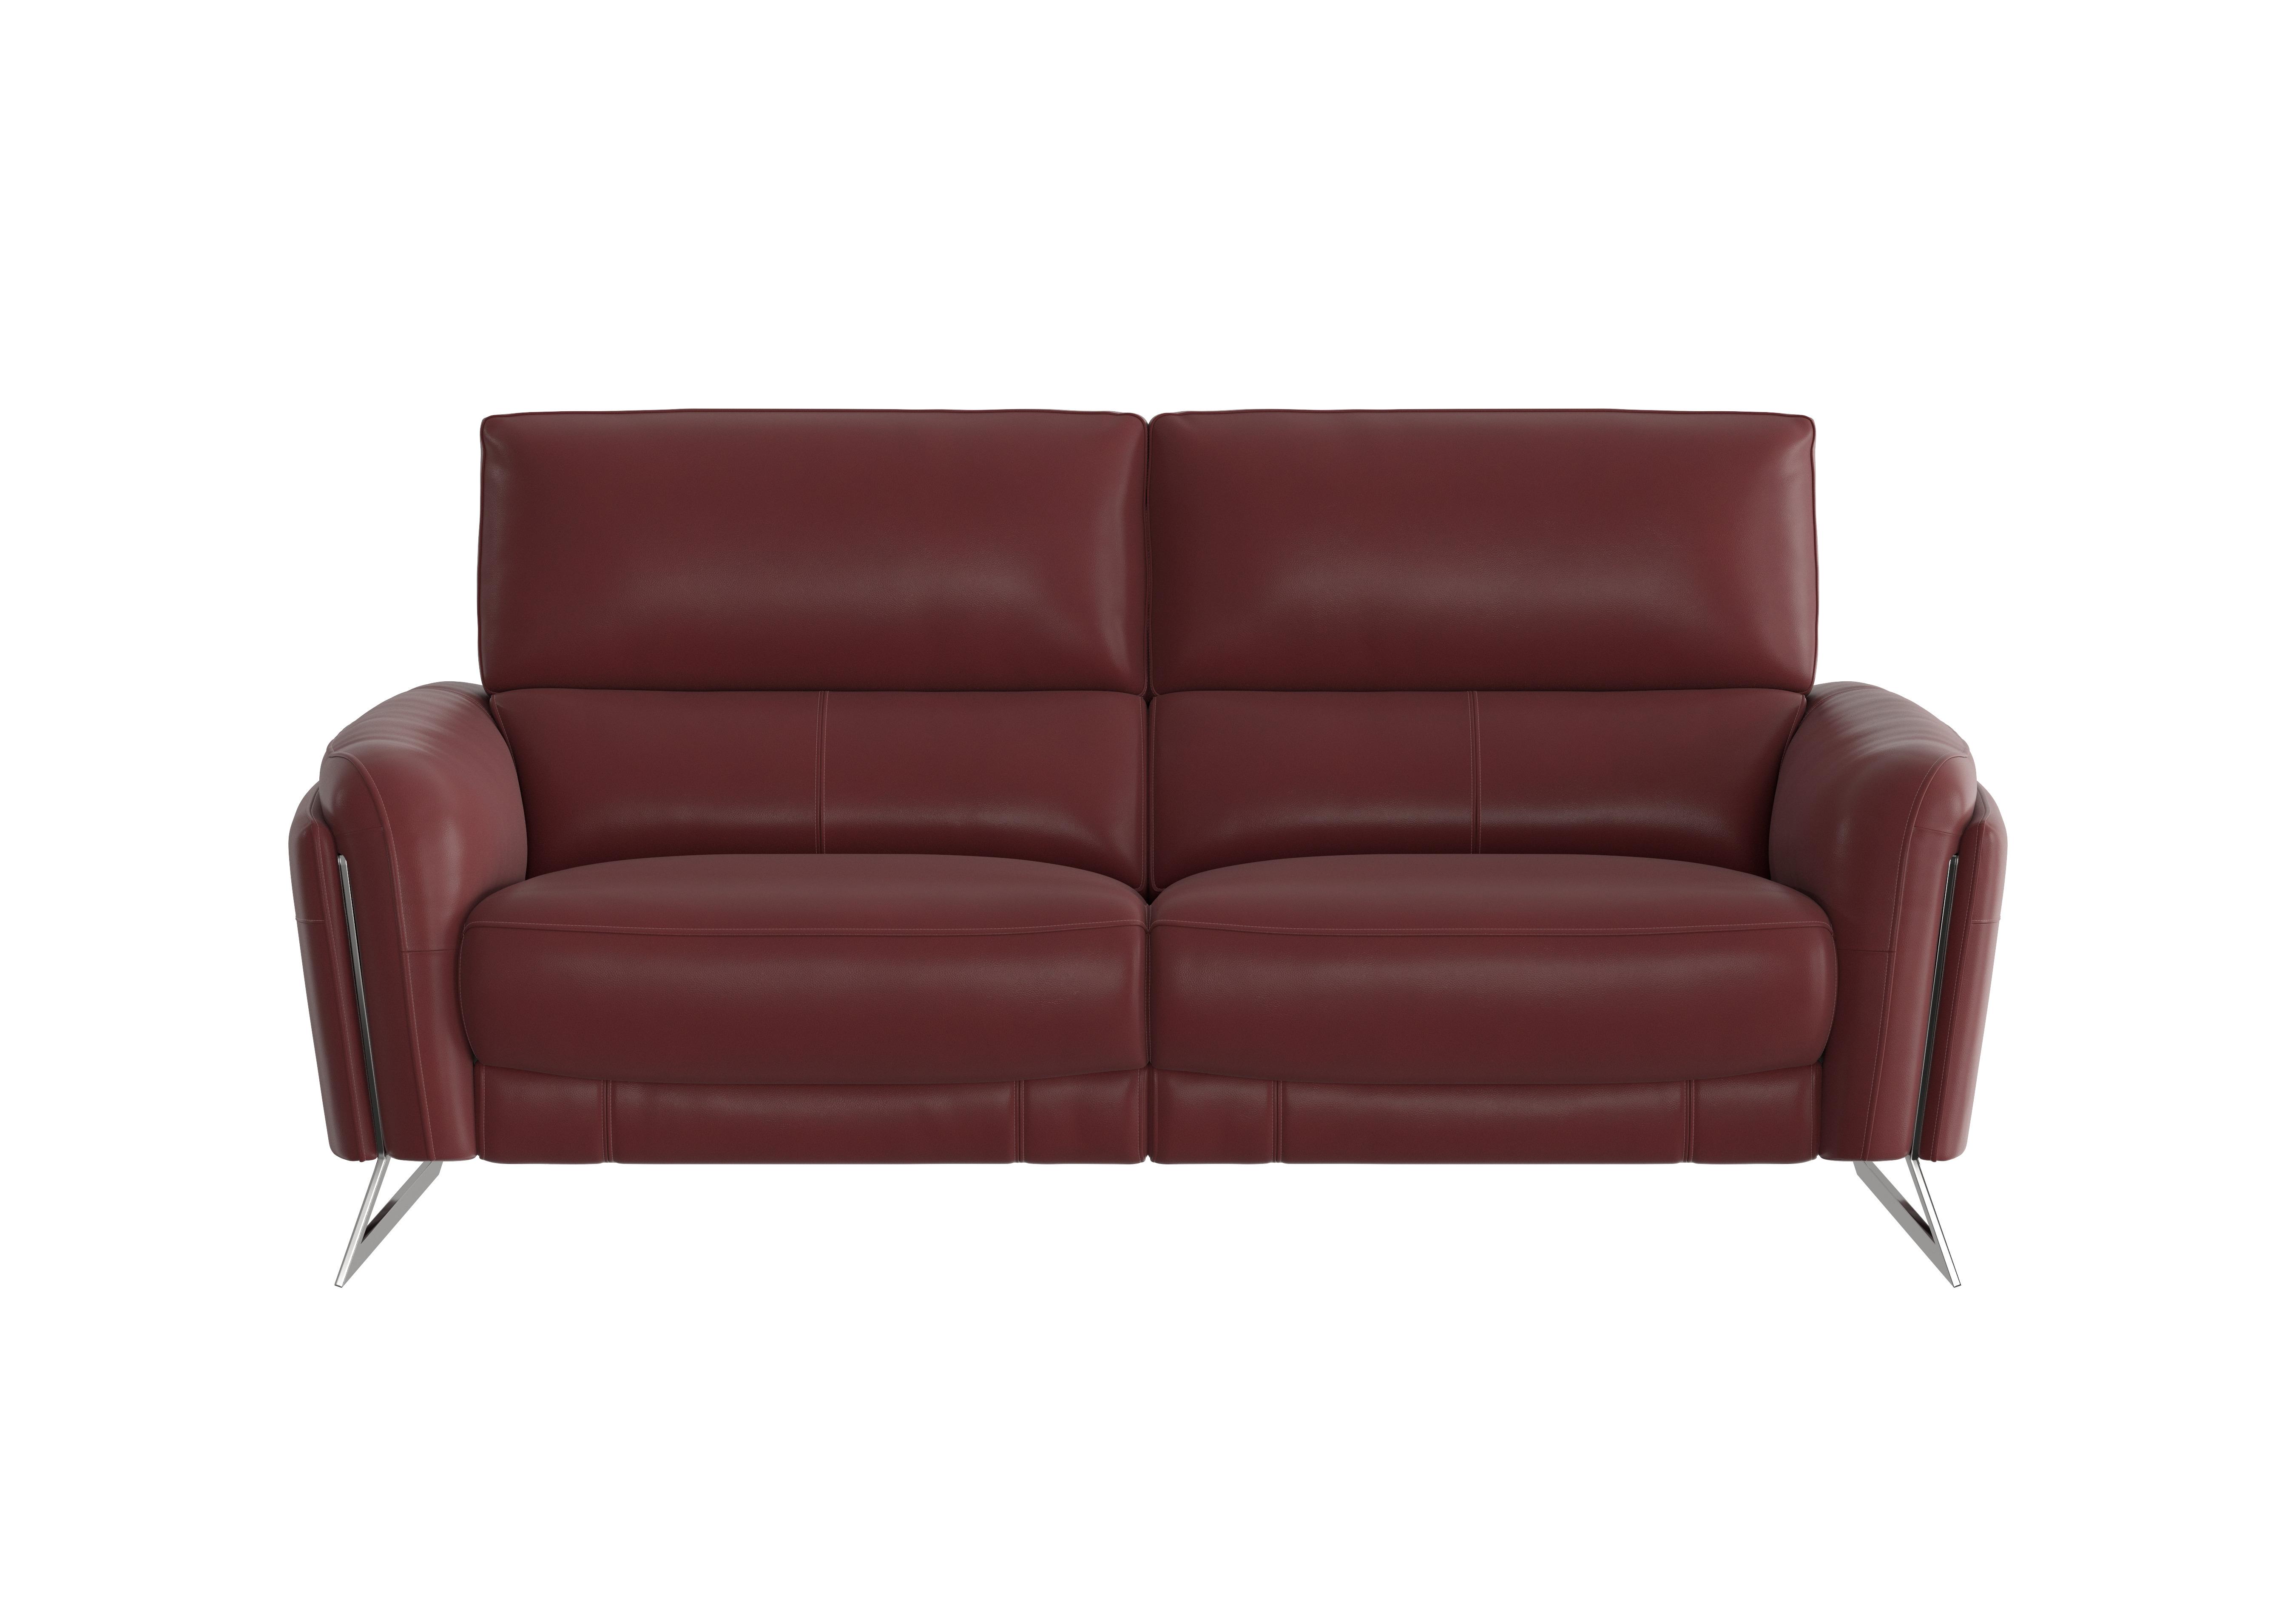 Amarilla 3 Seater Leather Sofa in Bv-035c Deep Red on Furniture Village